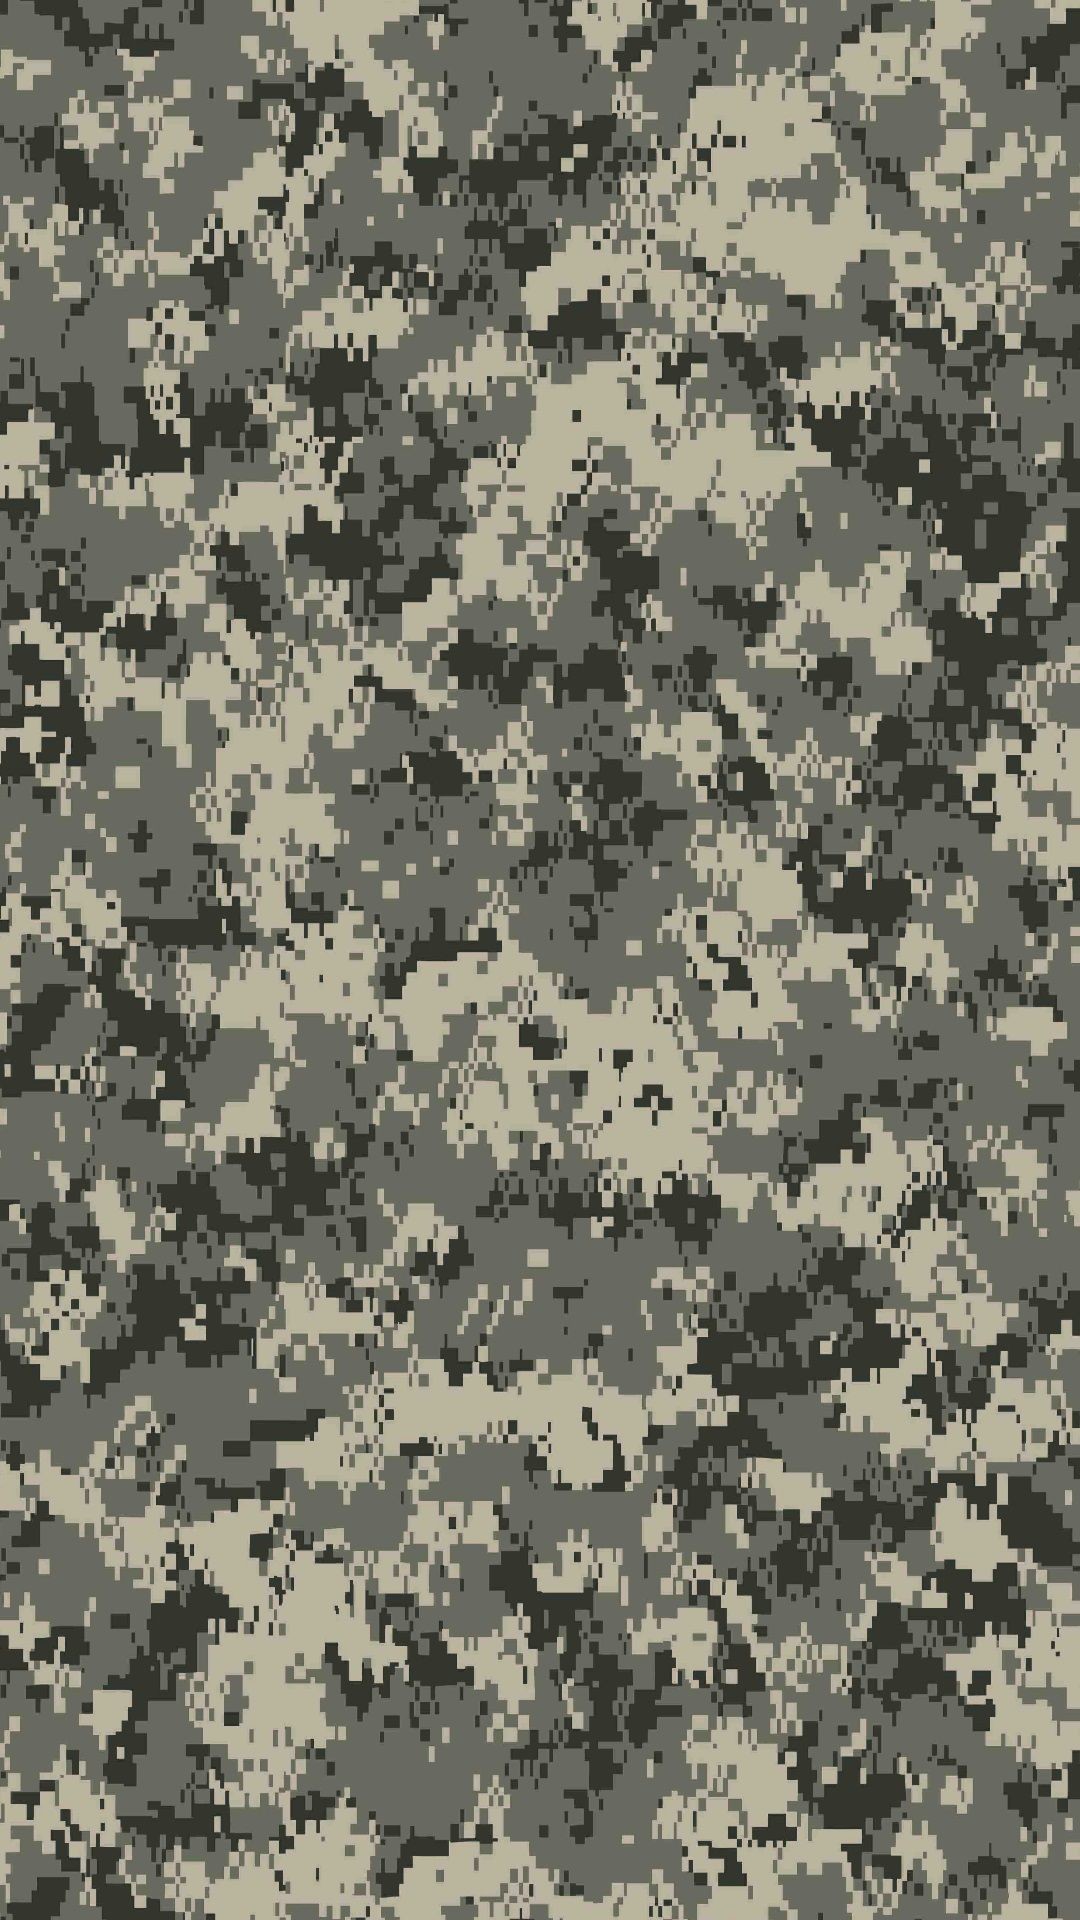 1080x1920 Camouflage wallpaper for iPhone or Android. Tags: camo, hunting, army,  backgrounds, mobile. #camouflage #camo #wallpaper